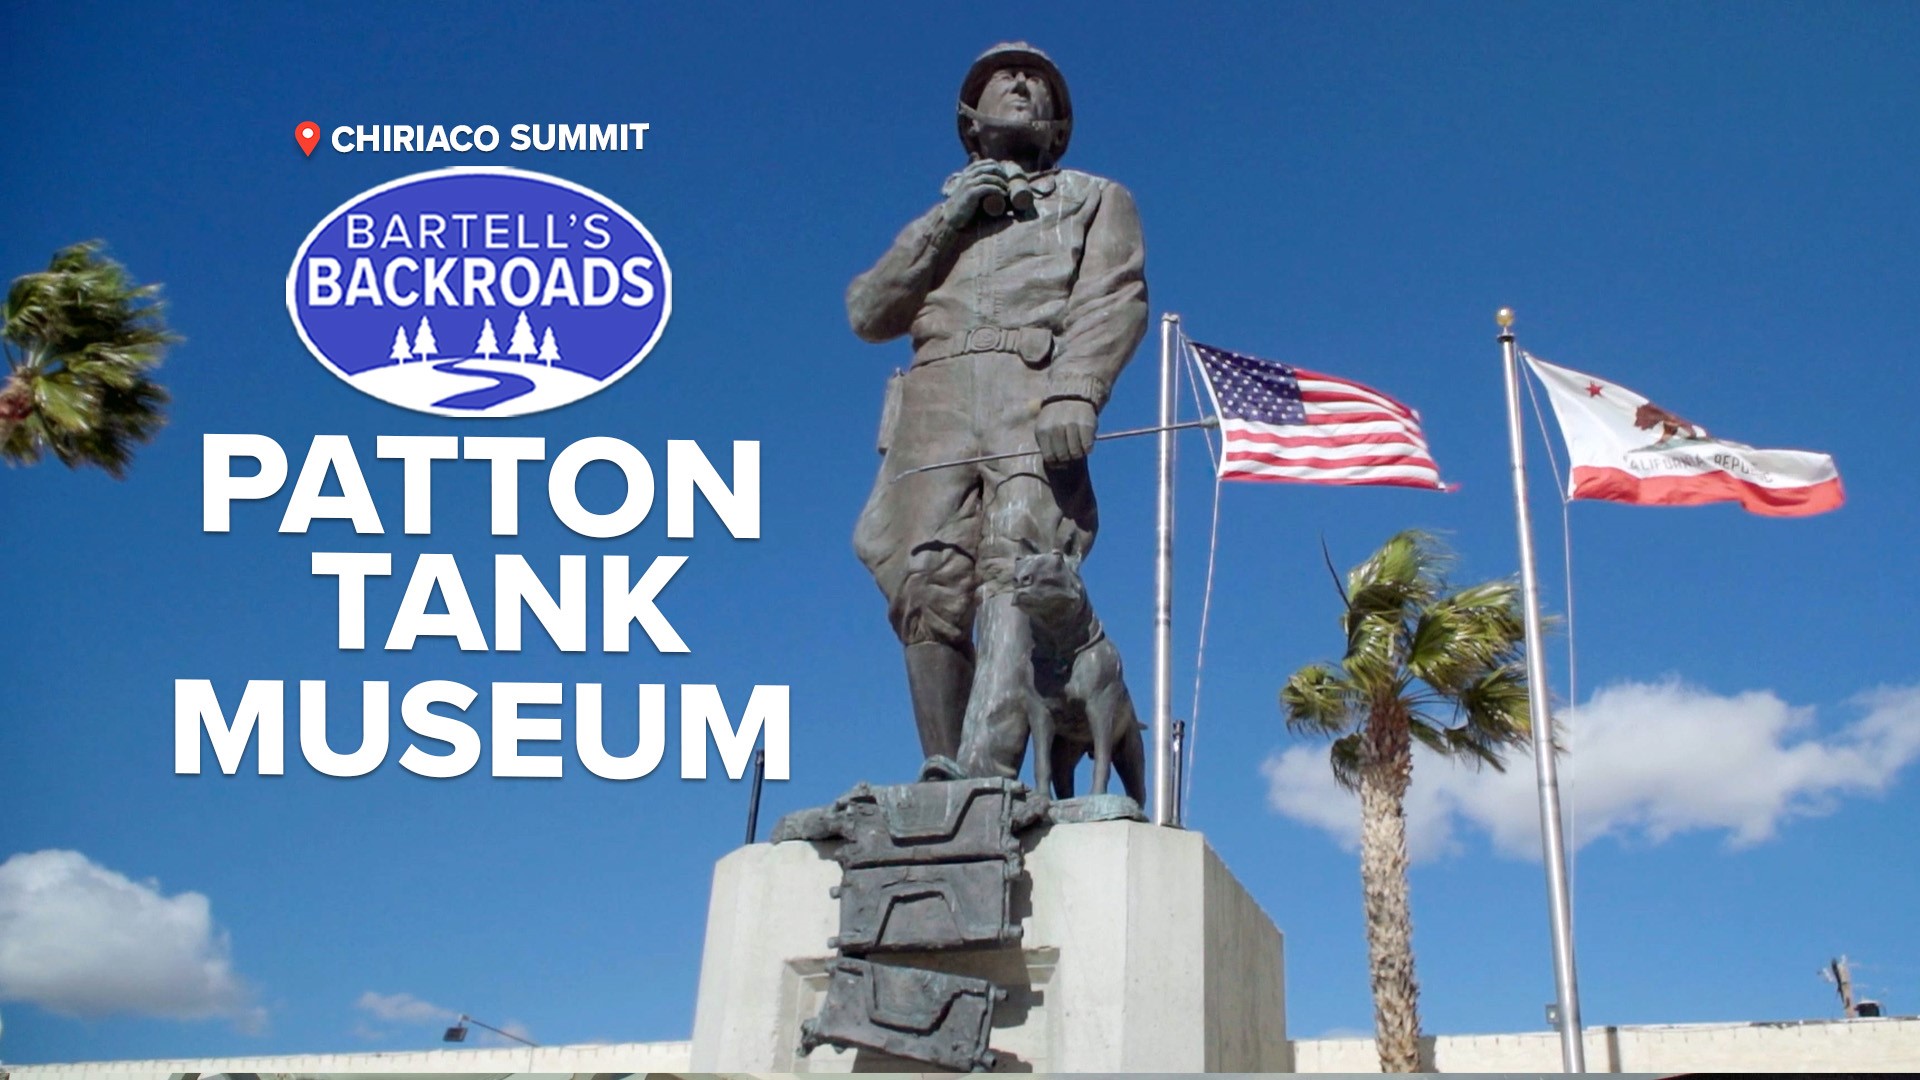 General Patton Memorial Museum lets visitors ride in a real tank.